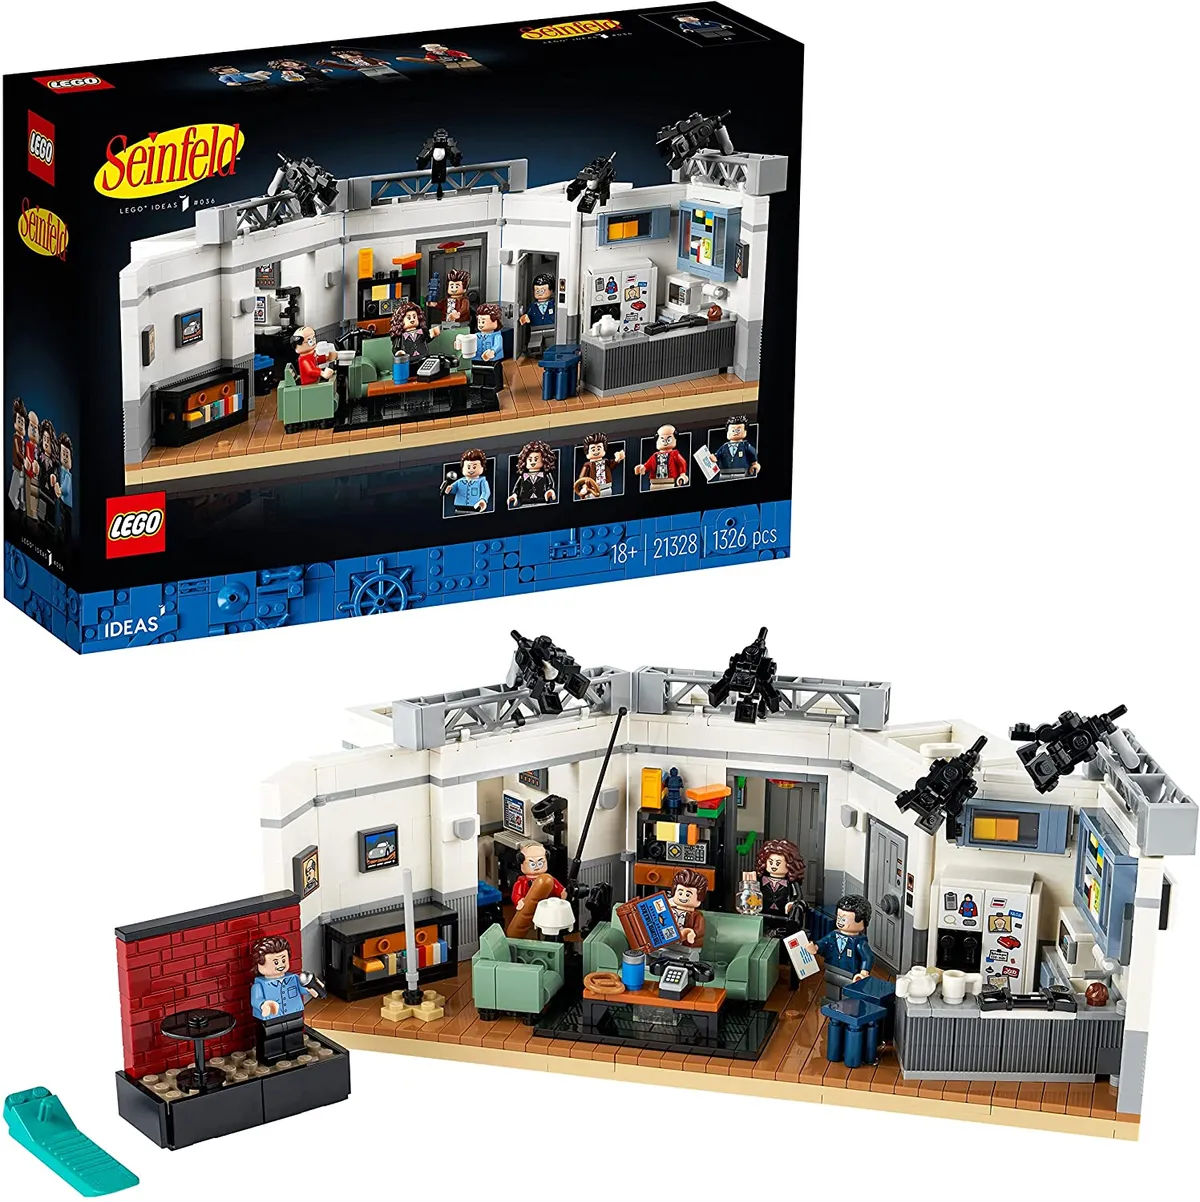 Lego Seinfeld kit box and set up of the kit